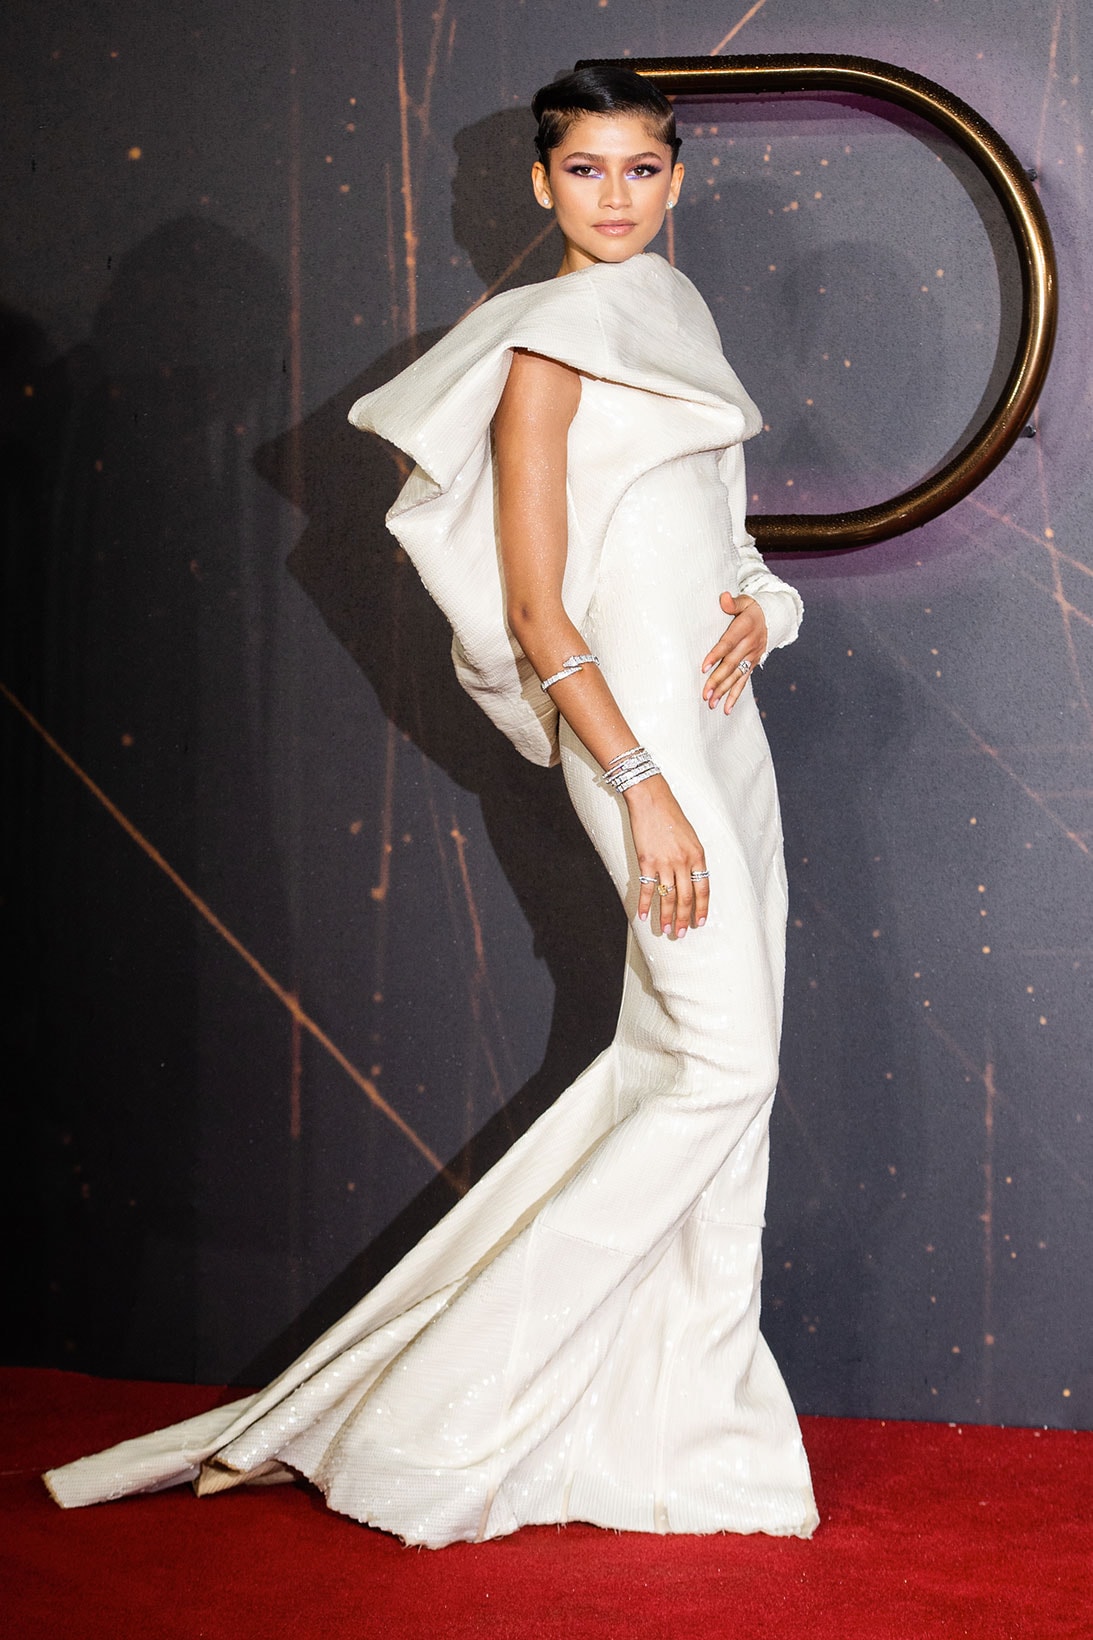 Zendaya Coleman Dune London Red Carpet Event Look Outfit Actor Rick Owens Dress Gown Cream White Sequined Timothee Chalamet Alexander Mcqueen Suit Fashion Celebrity Style 